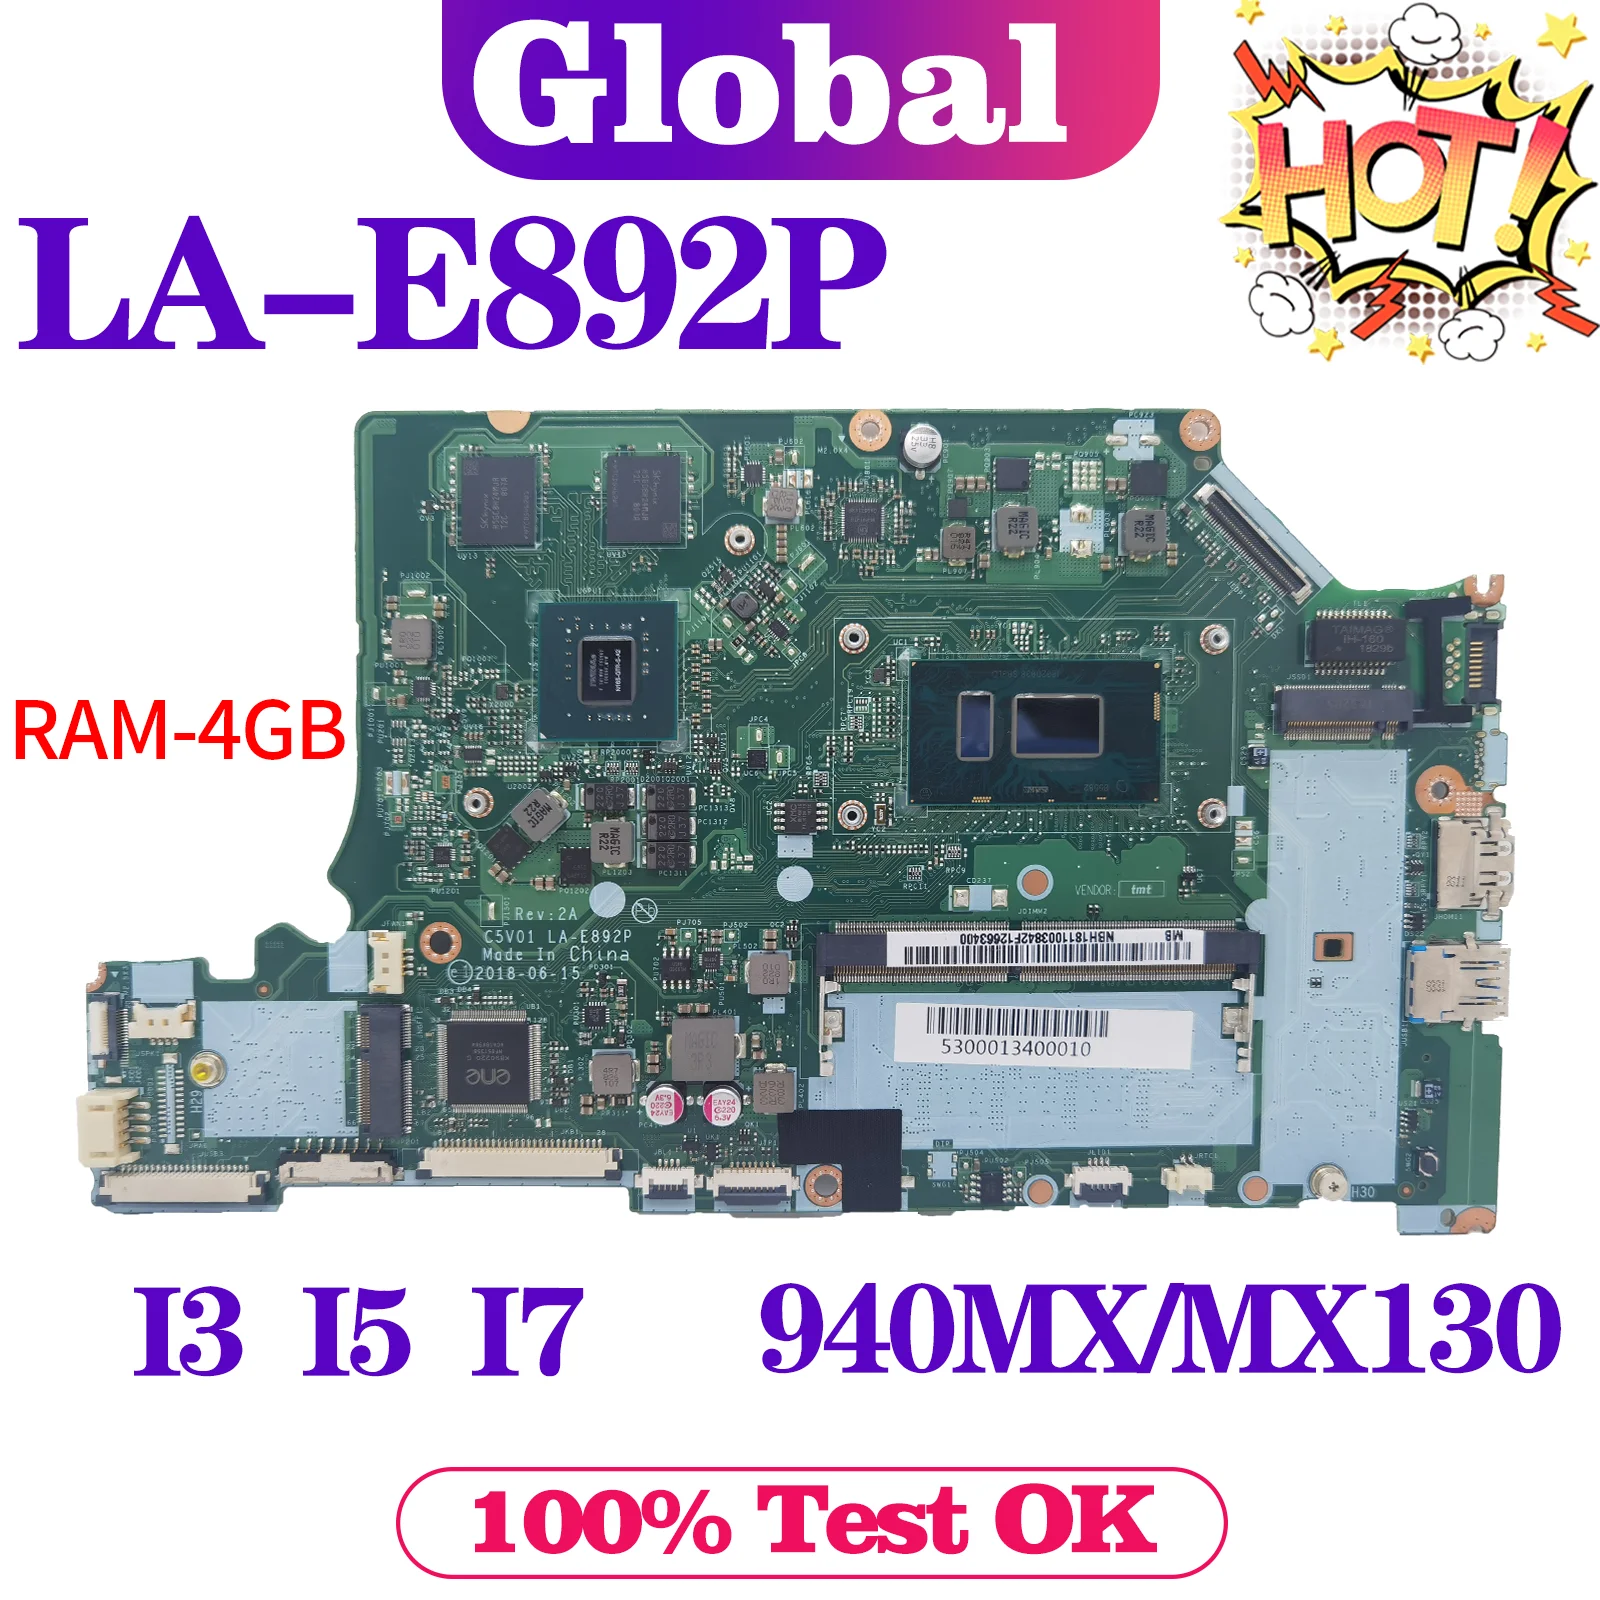 

Mainboard For ACER Aspire A515-51G A615-51G A315-51G Laptop Motherboard LA-E892P Maintherboard i3 i5 i7 RAM-4GB 940MX/MX130